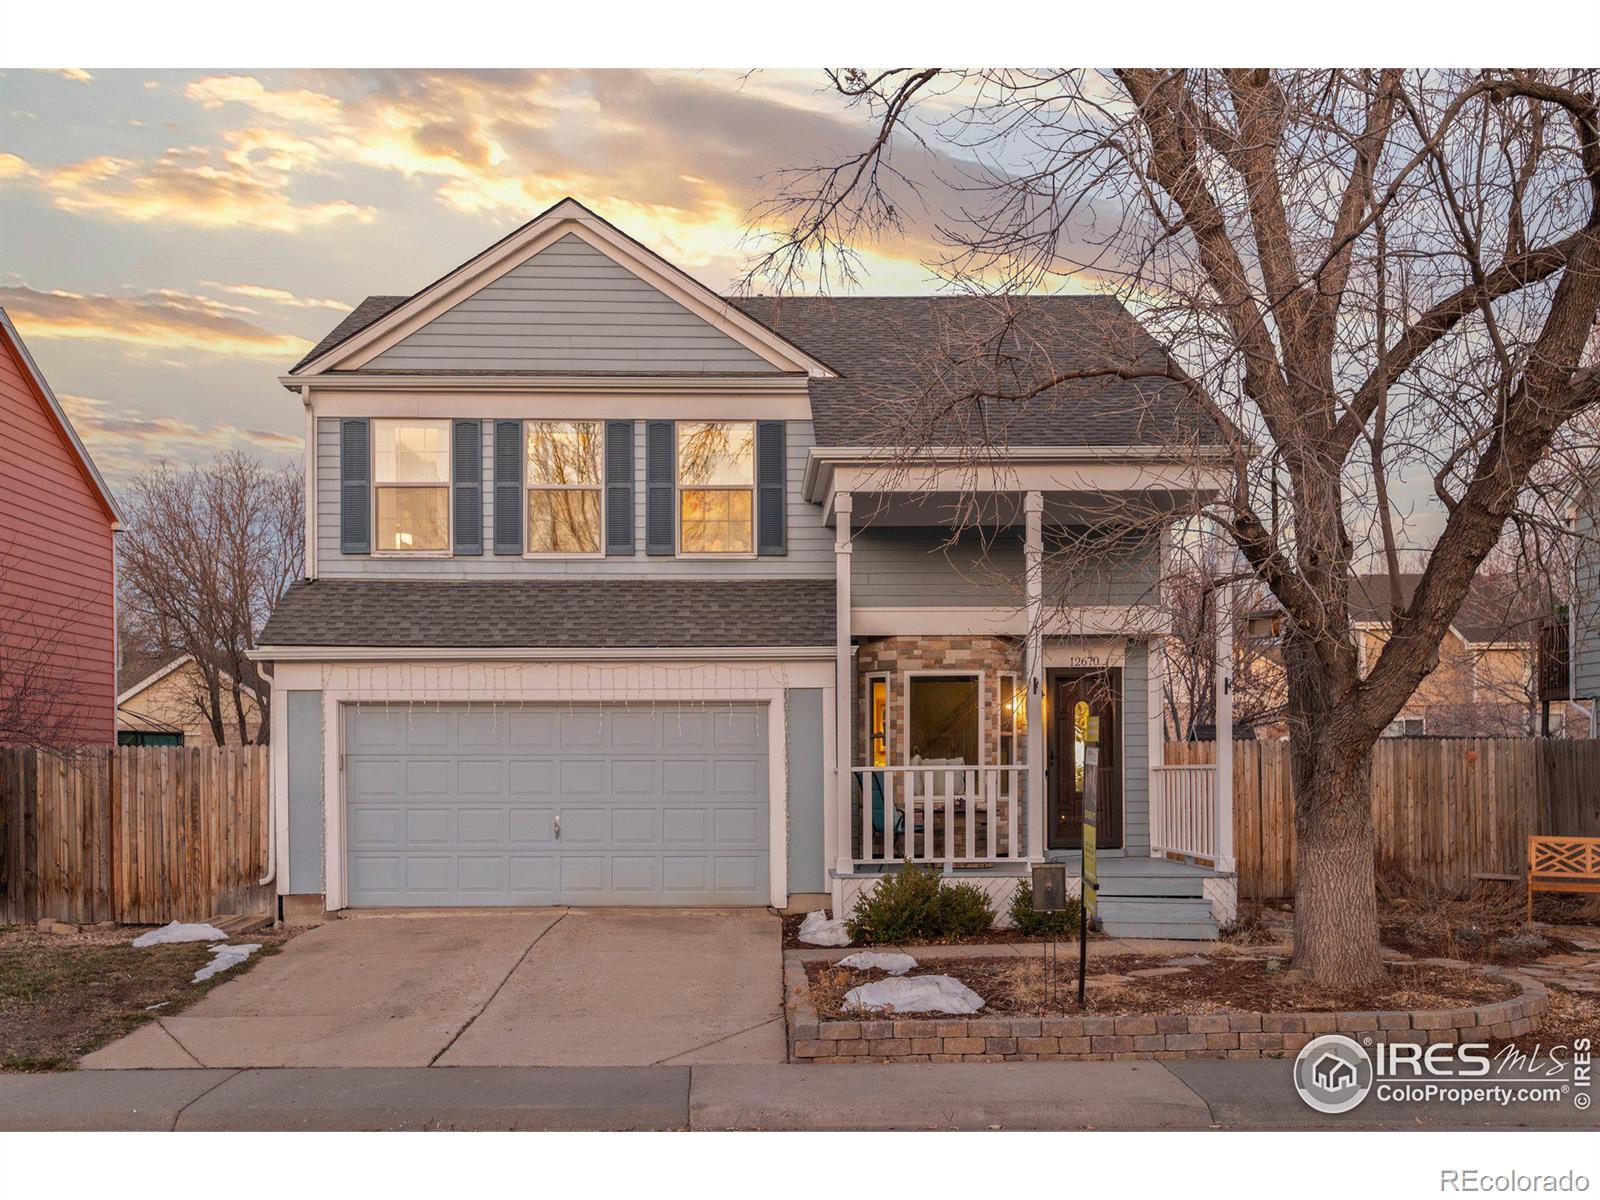 12670  green circle, broomfield sold home. Closed on 2024-04-19 for $532,500.